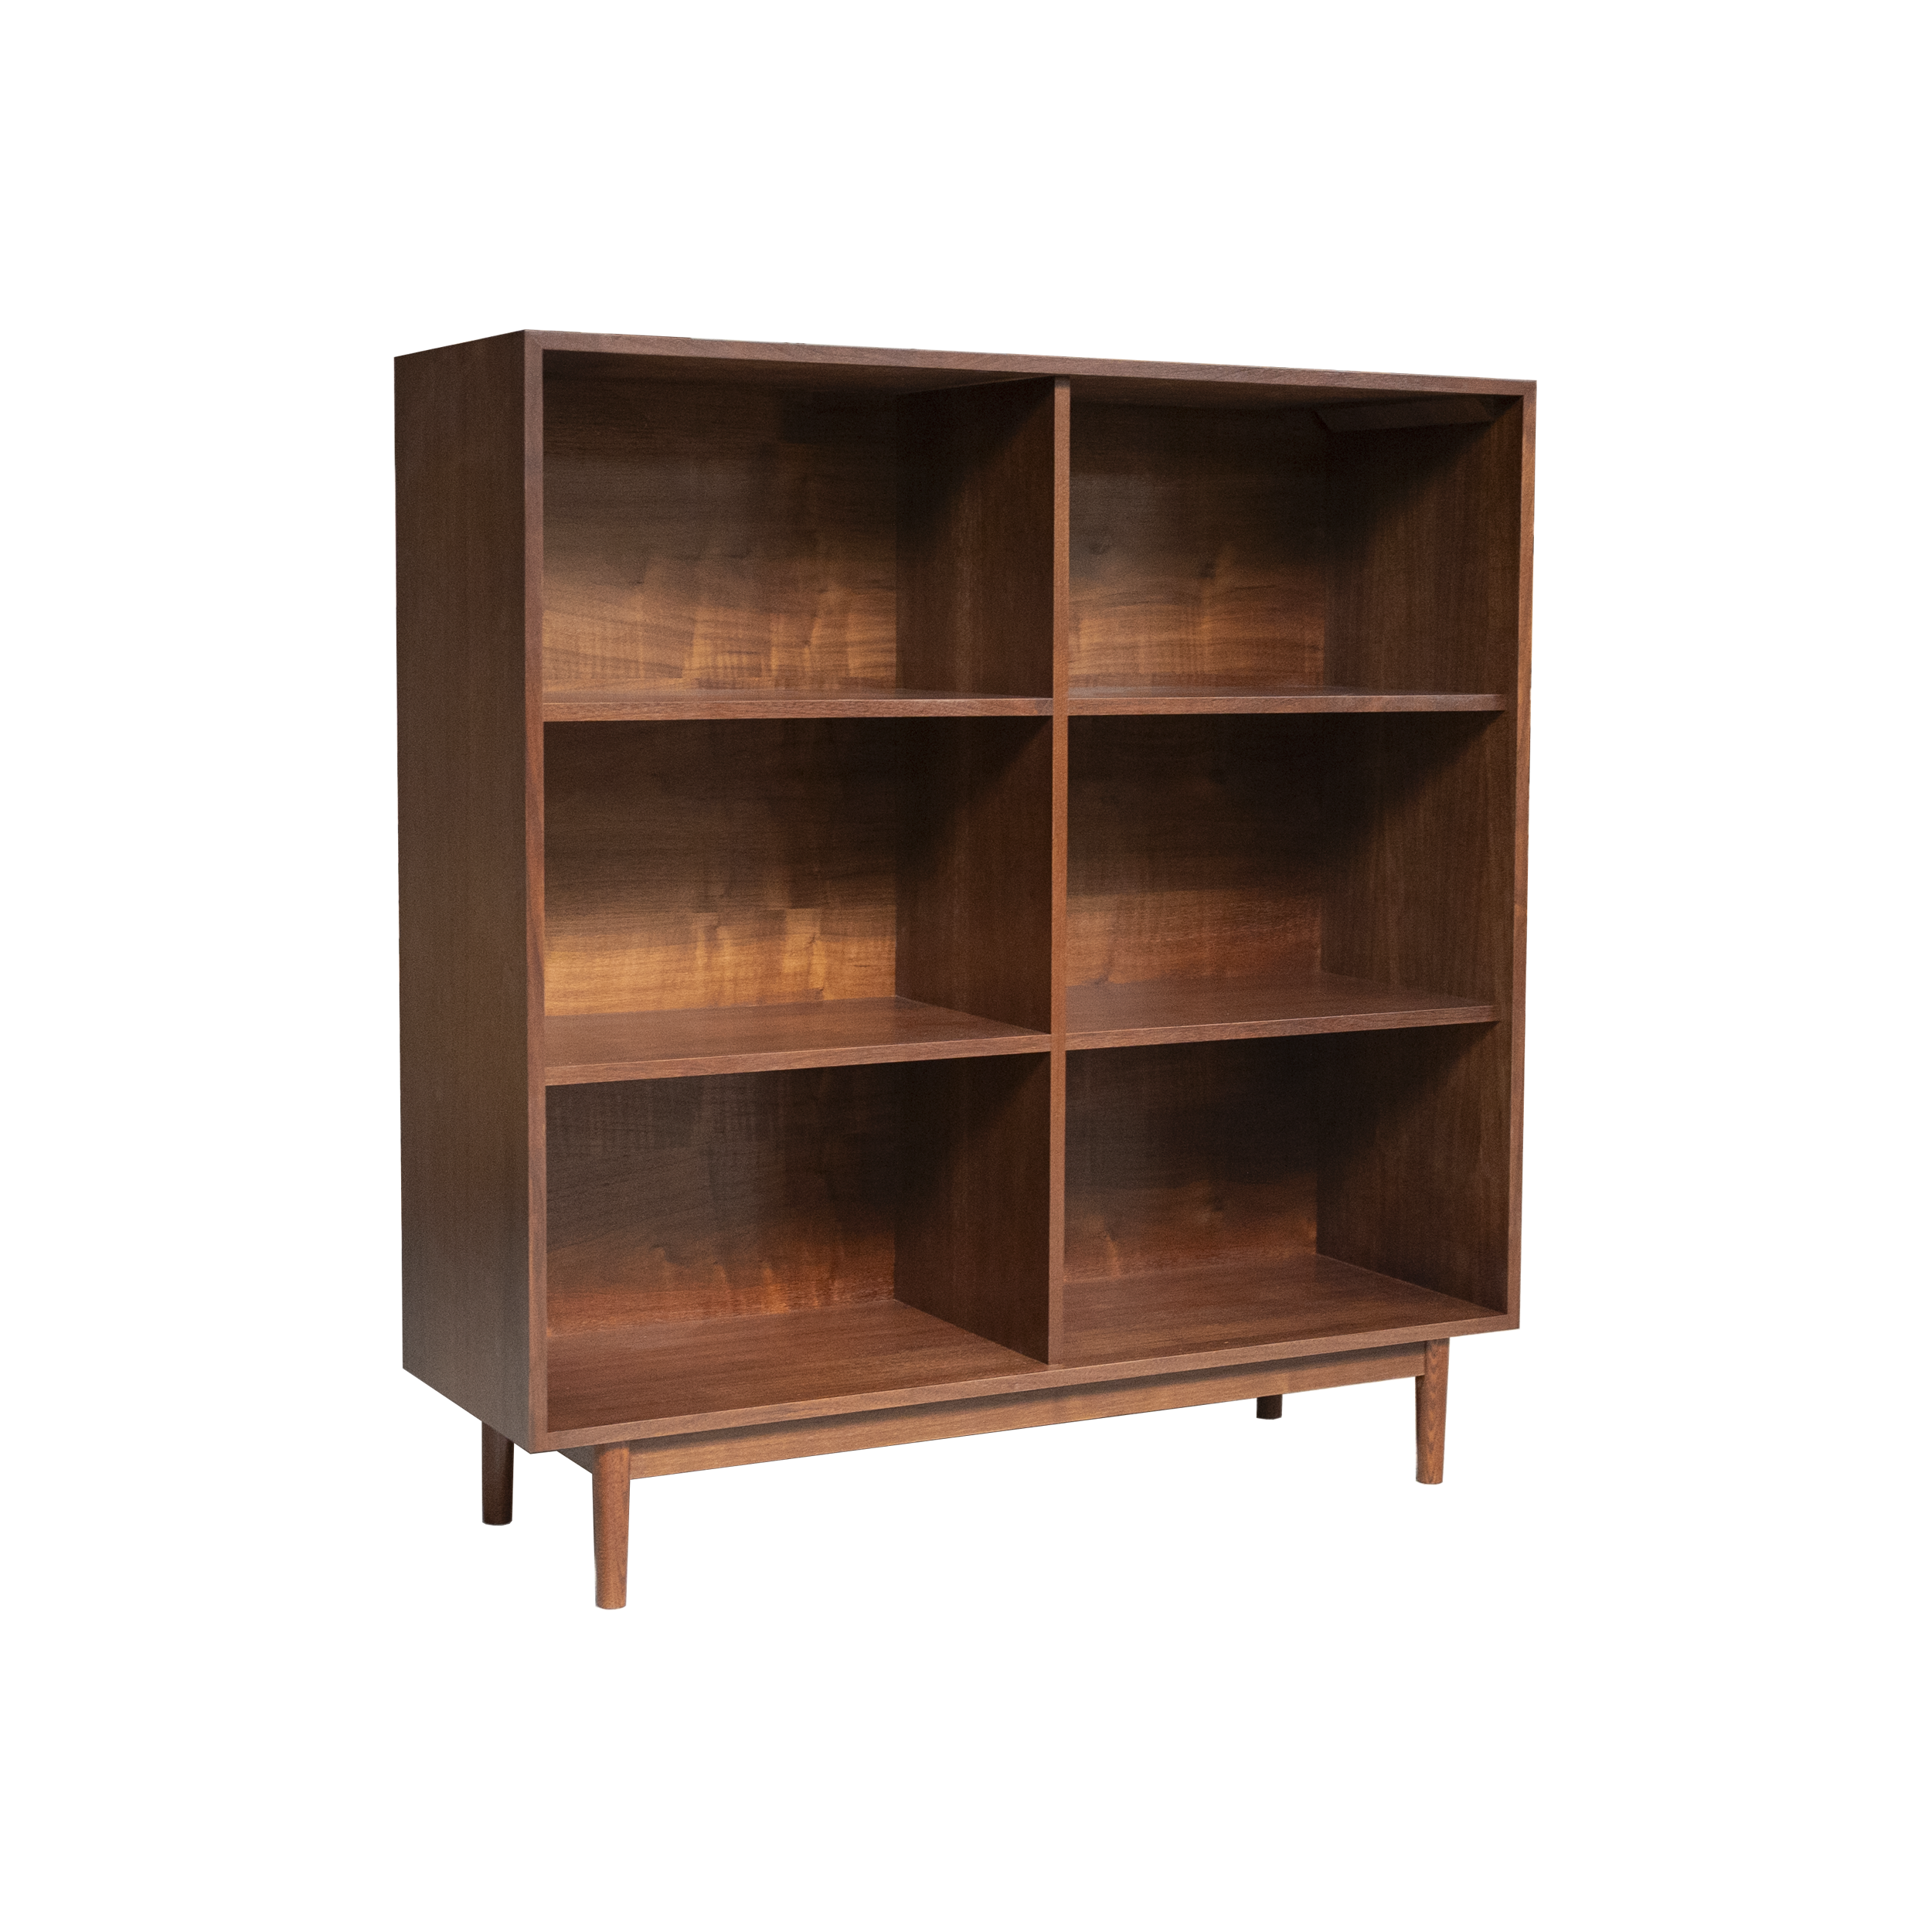 48.25" 3 x 2 Record Storage Cabinet - Ready to Ship